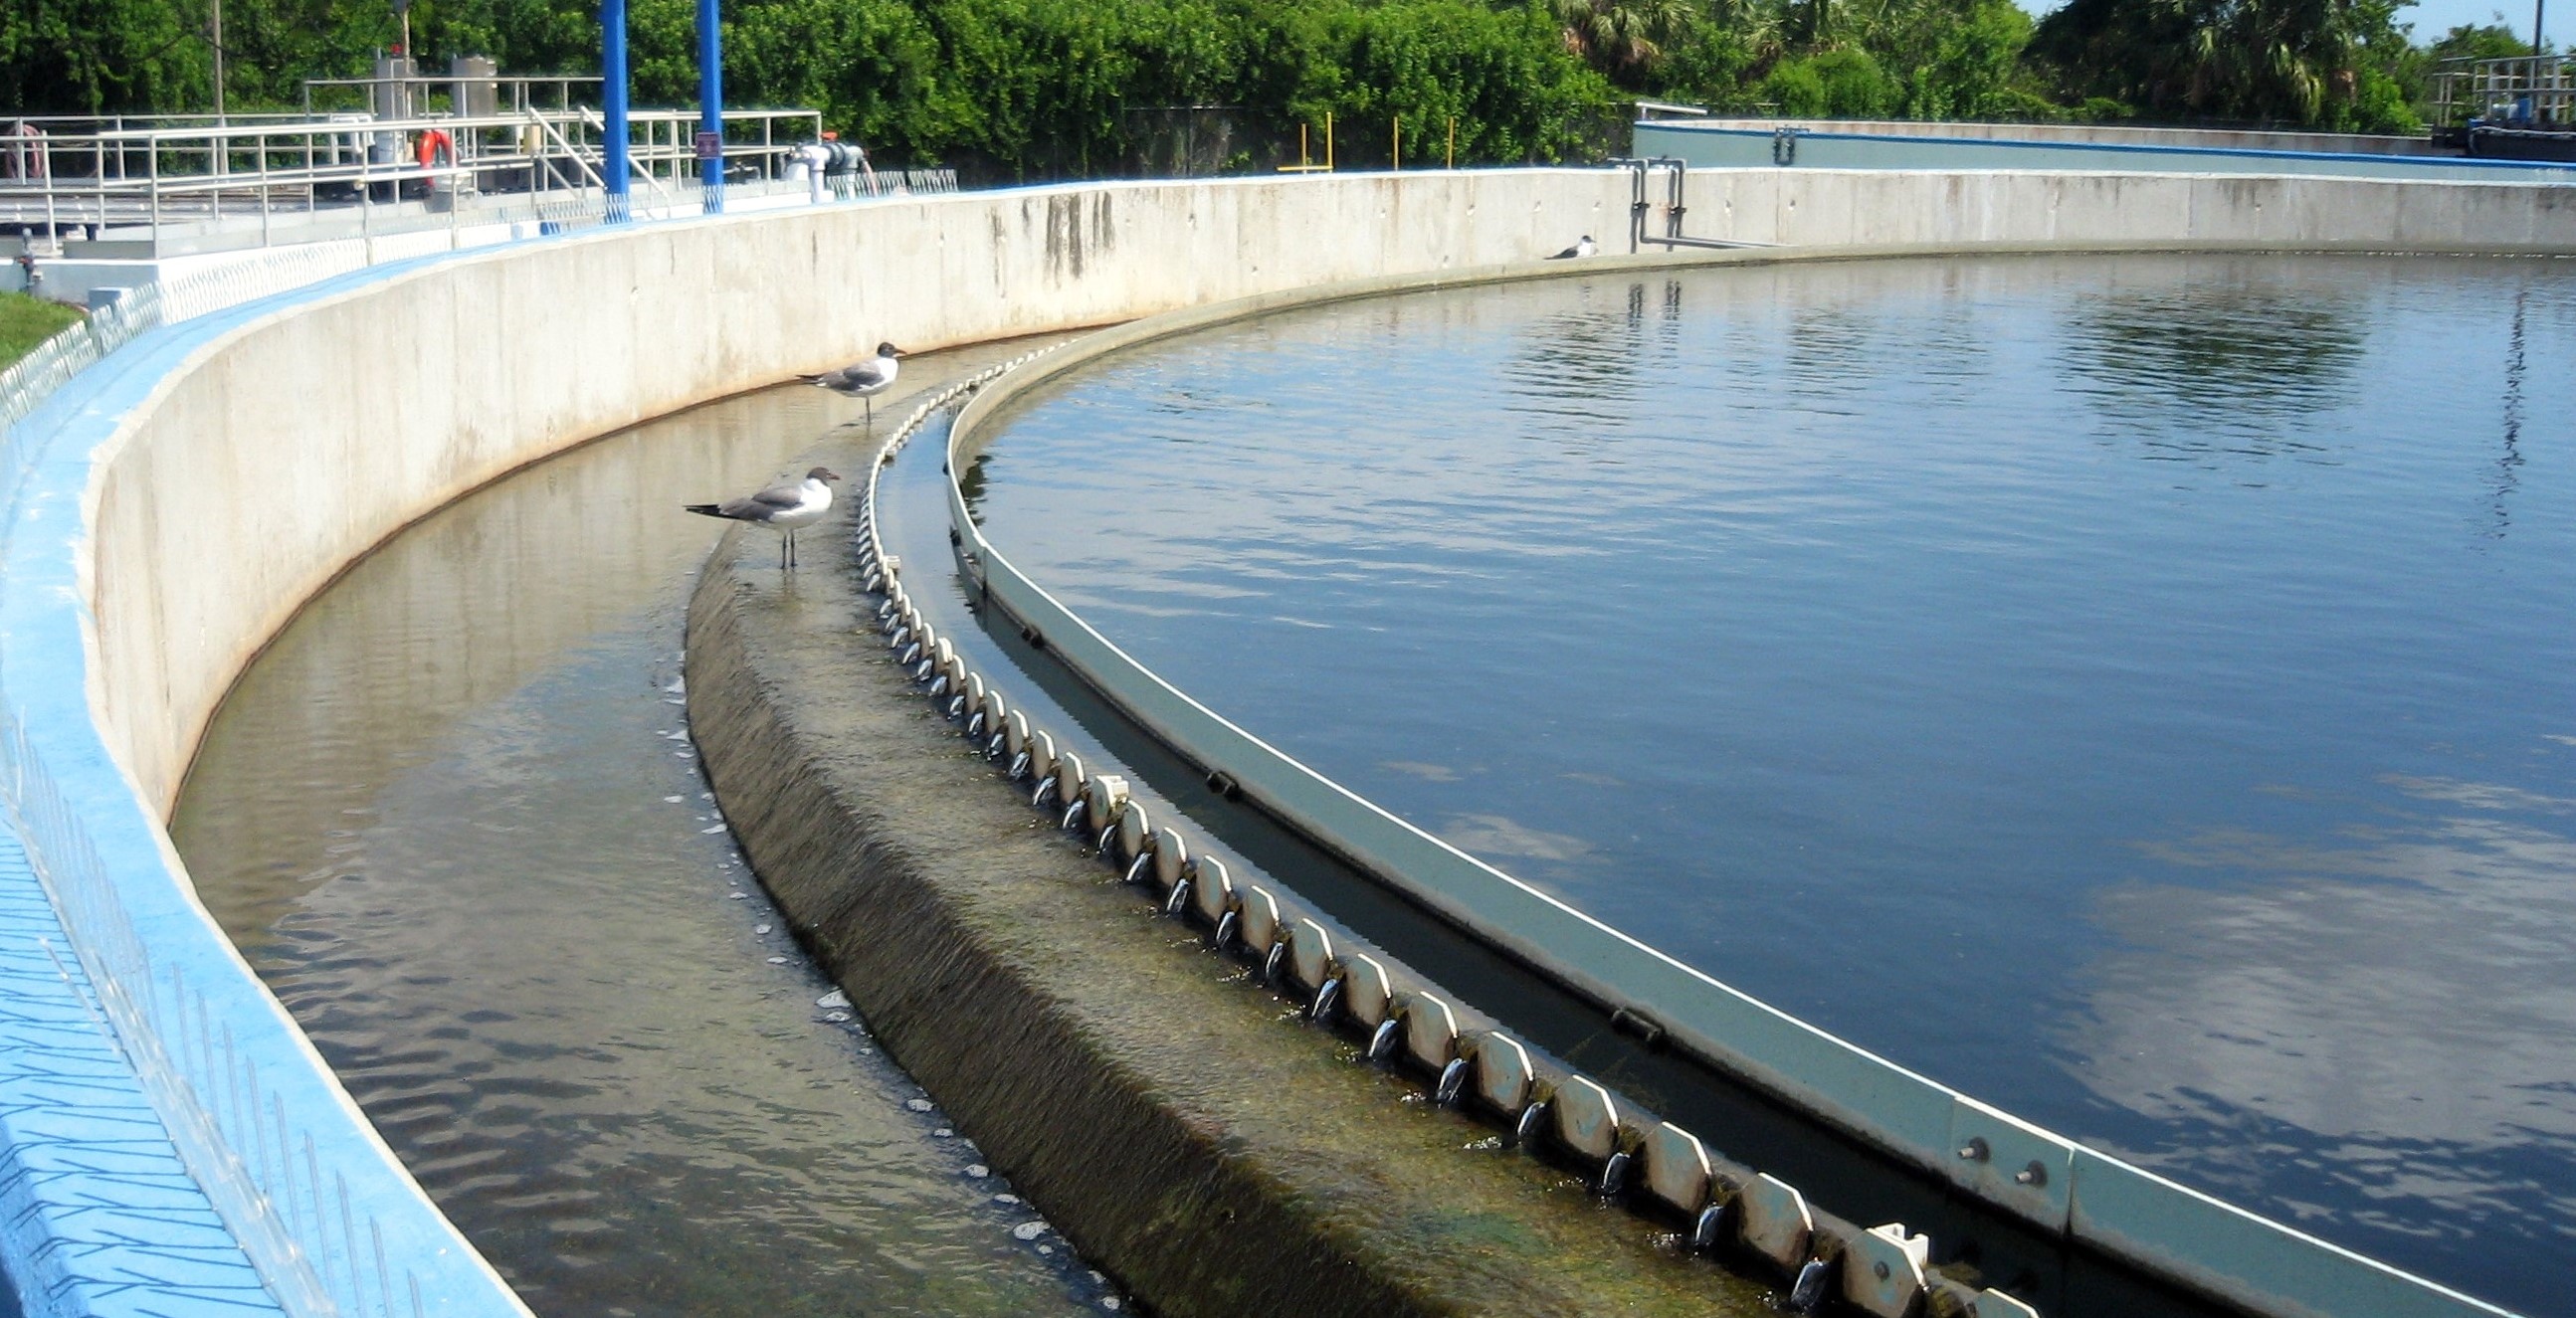 Photo of a water cascading over the weir of a clarifier. Two seagulls are perched in the weir.